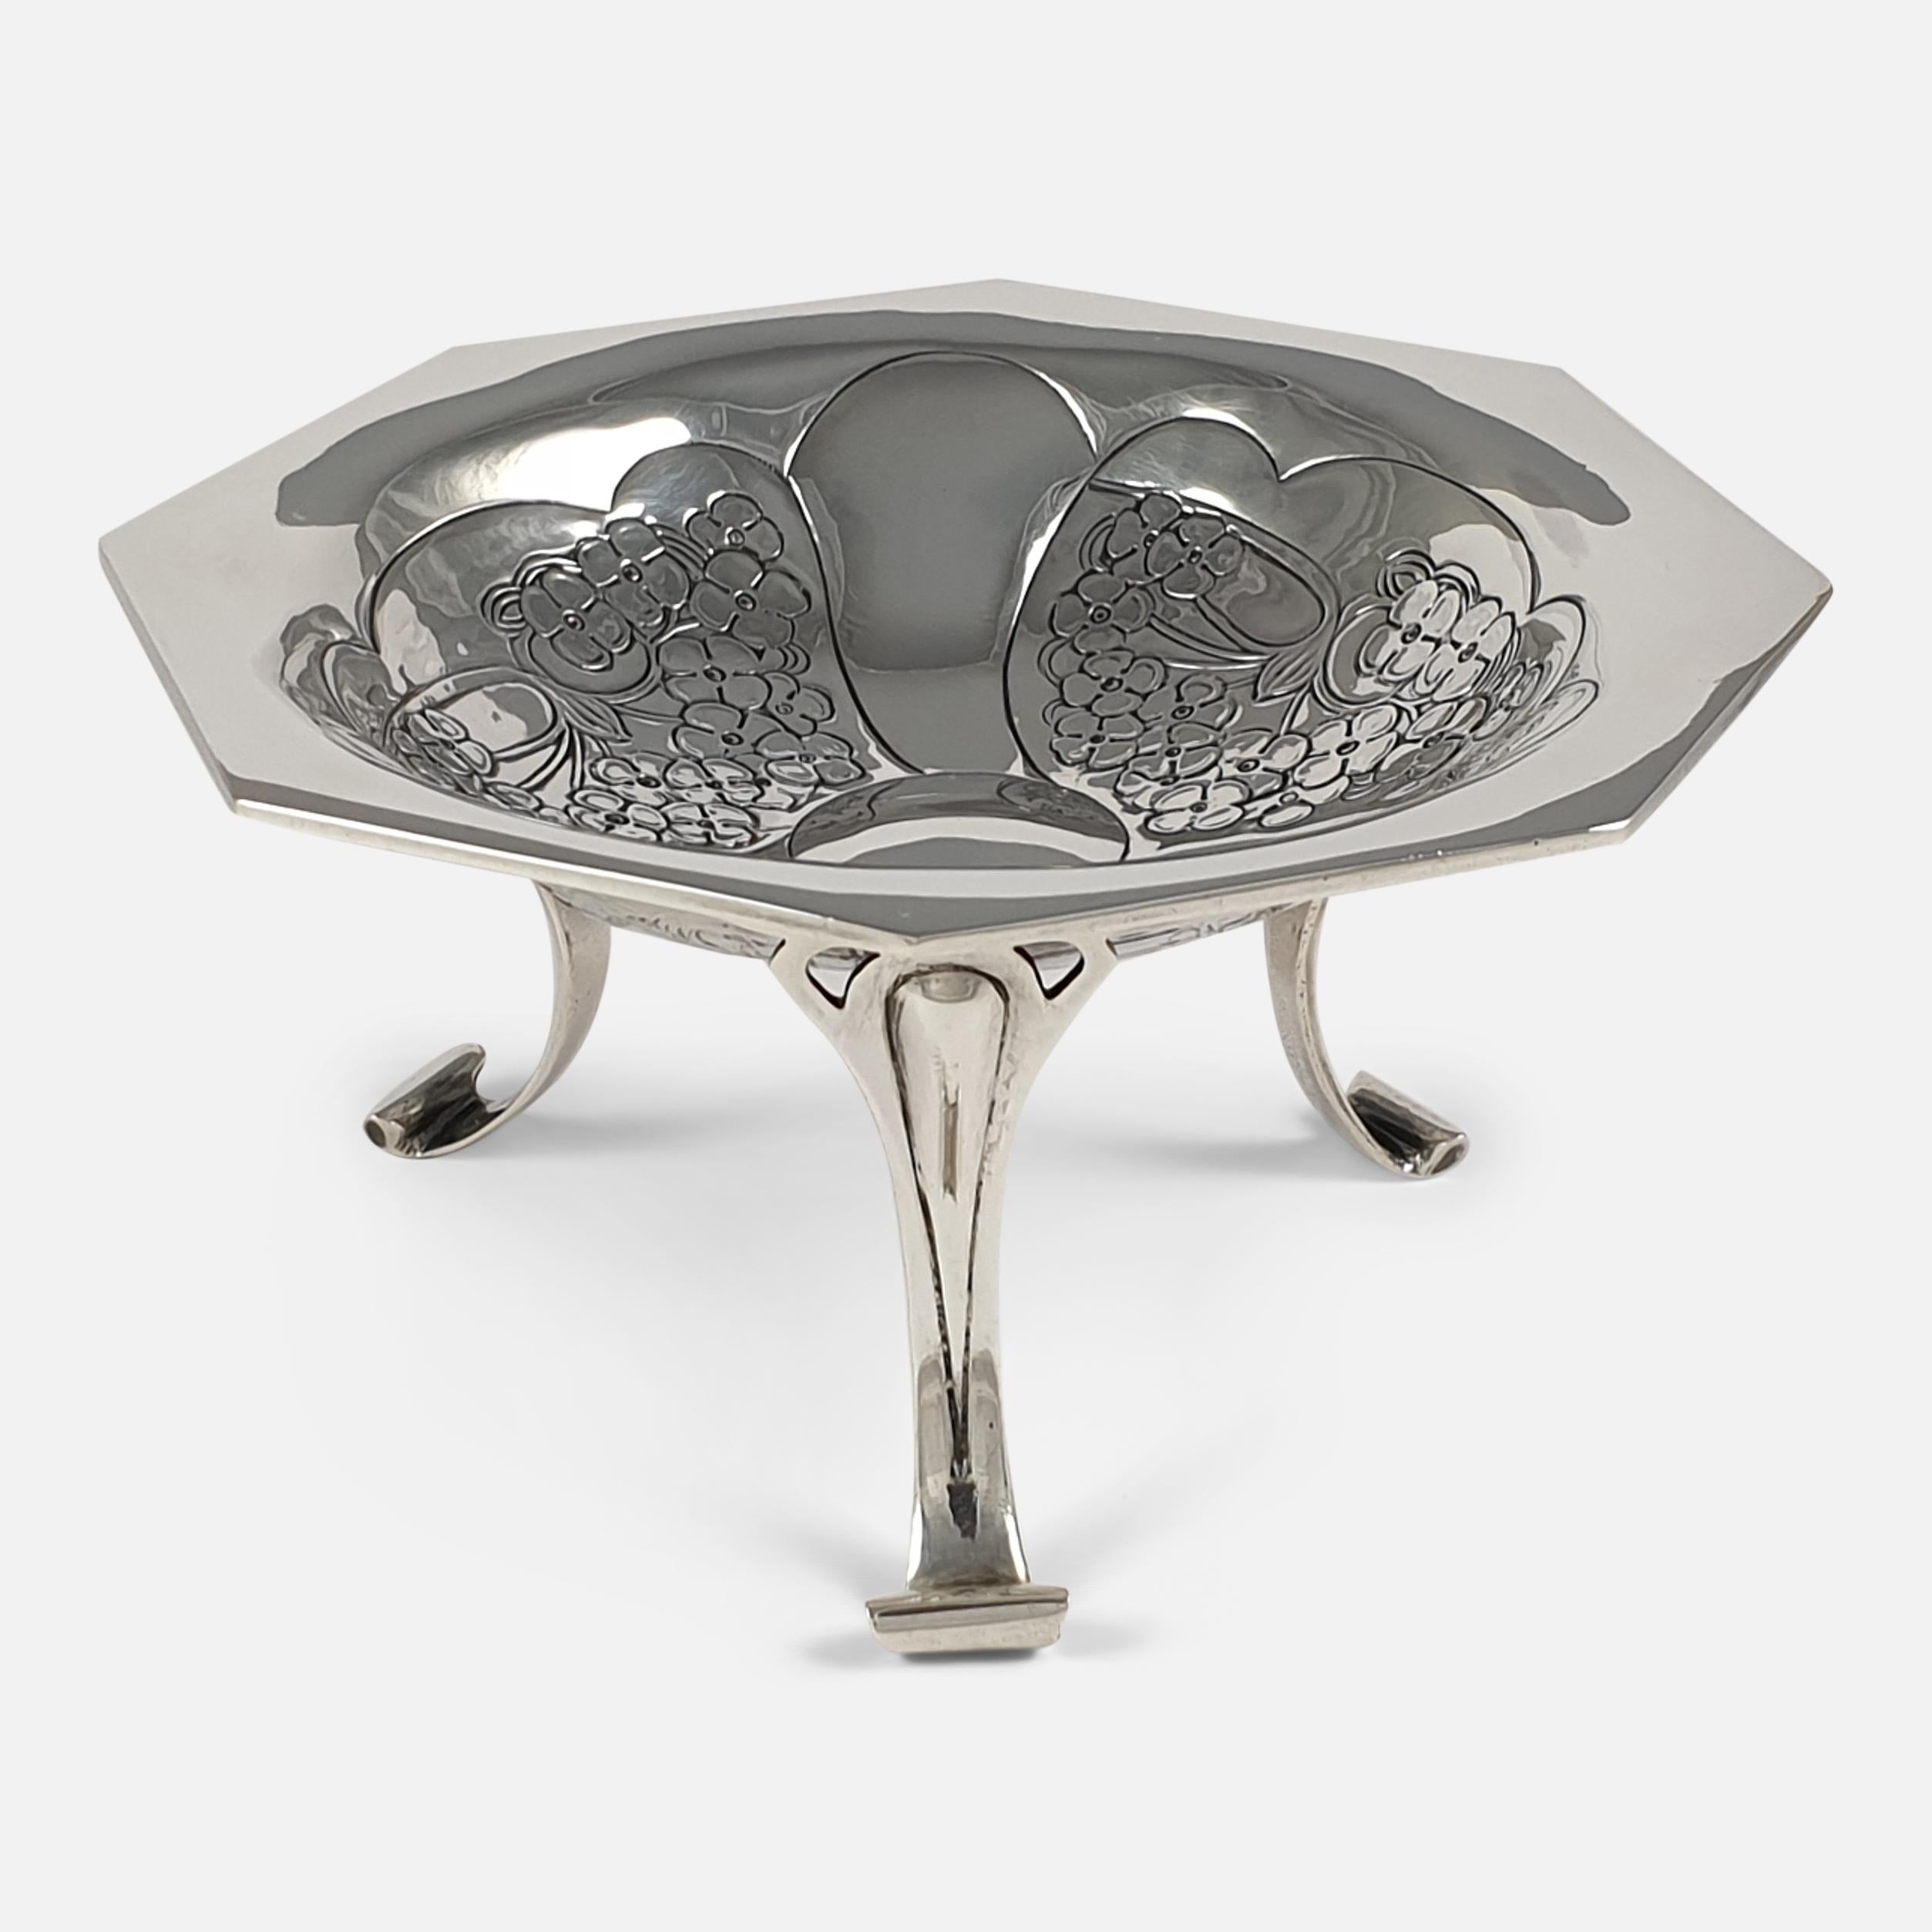 British Edwardian Art Nouveau Silver Tazza by Kate Harris for W.G. Connell, 1901 For Sale